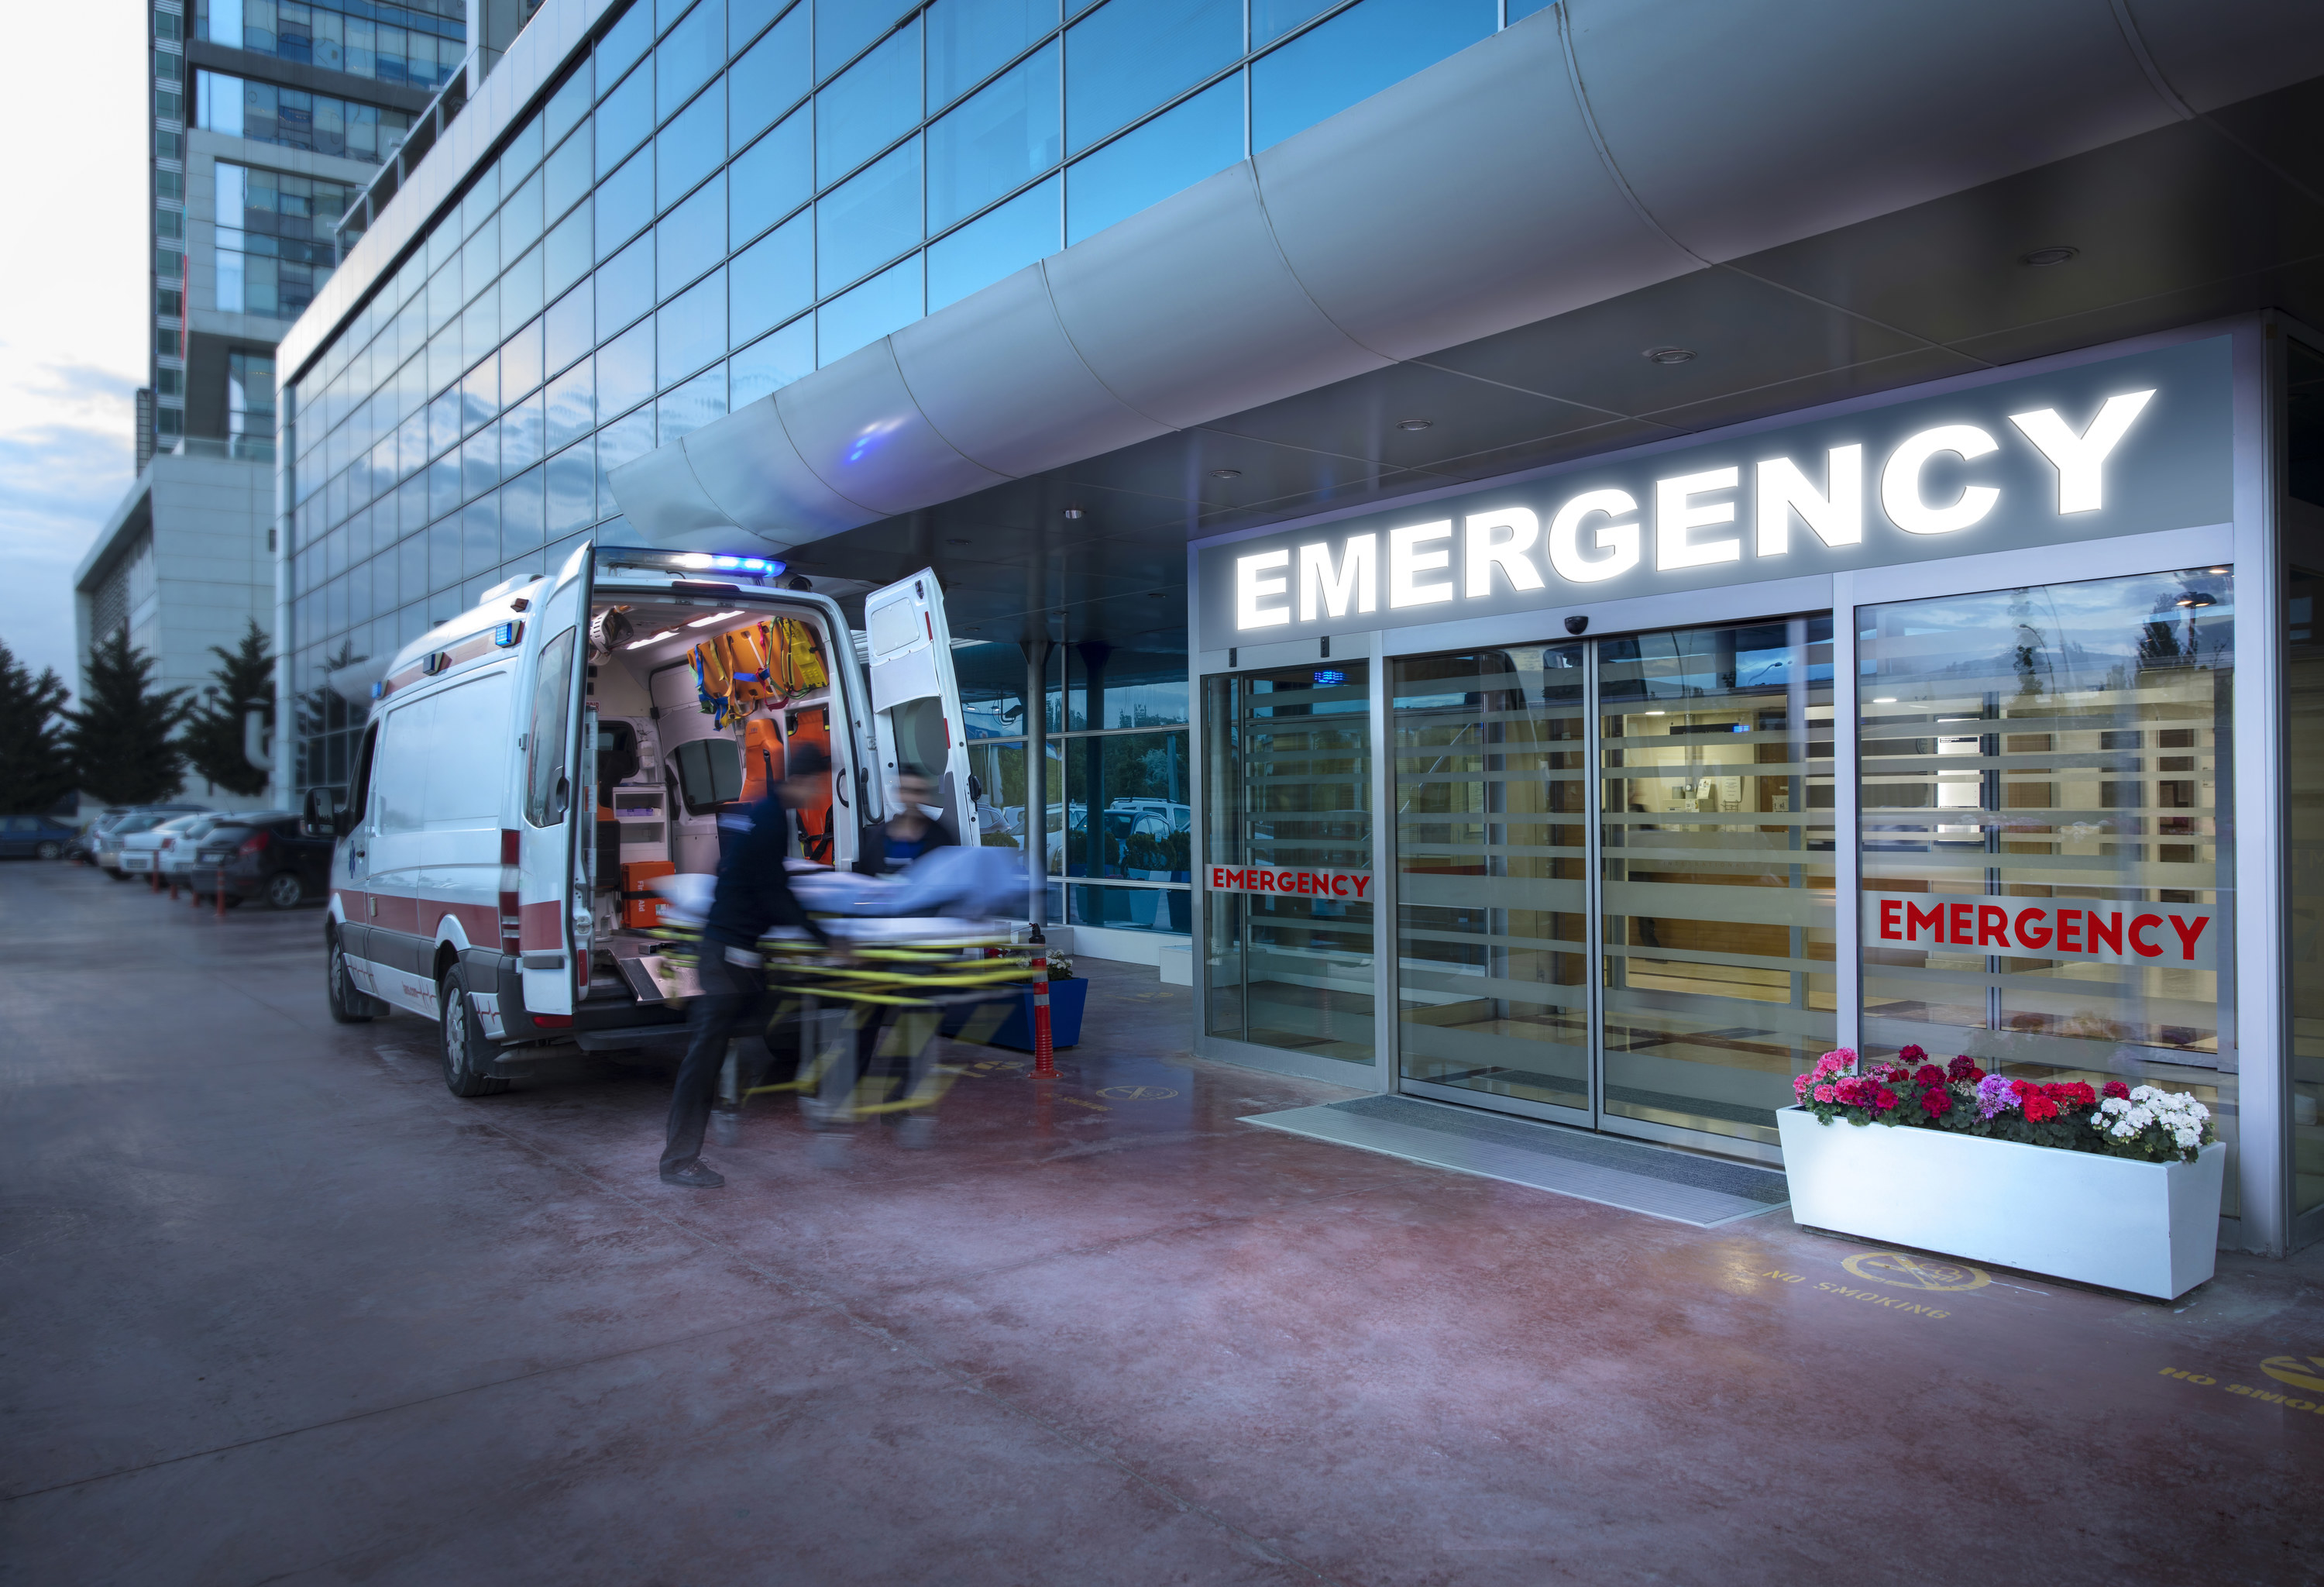 Ambulance parked outside the emergency room at a hospital